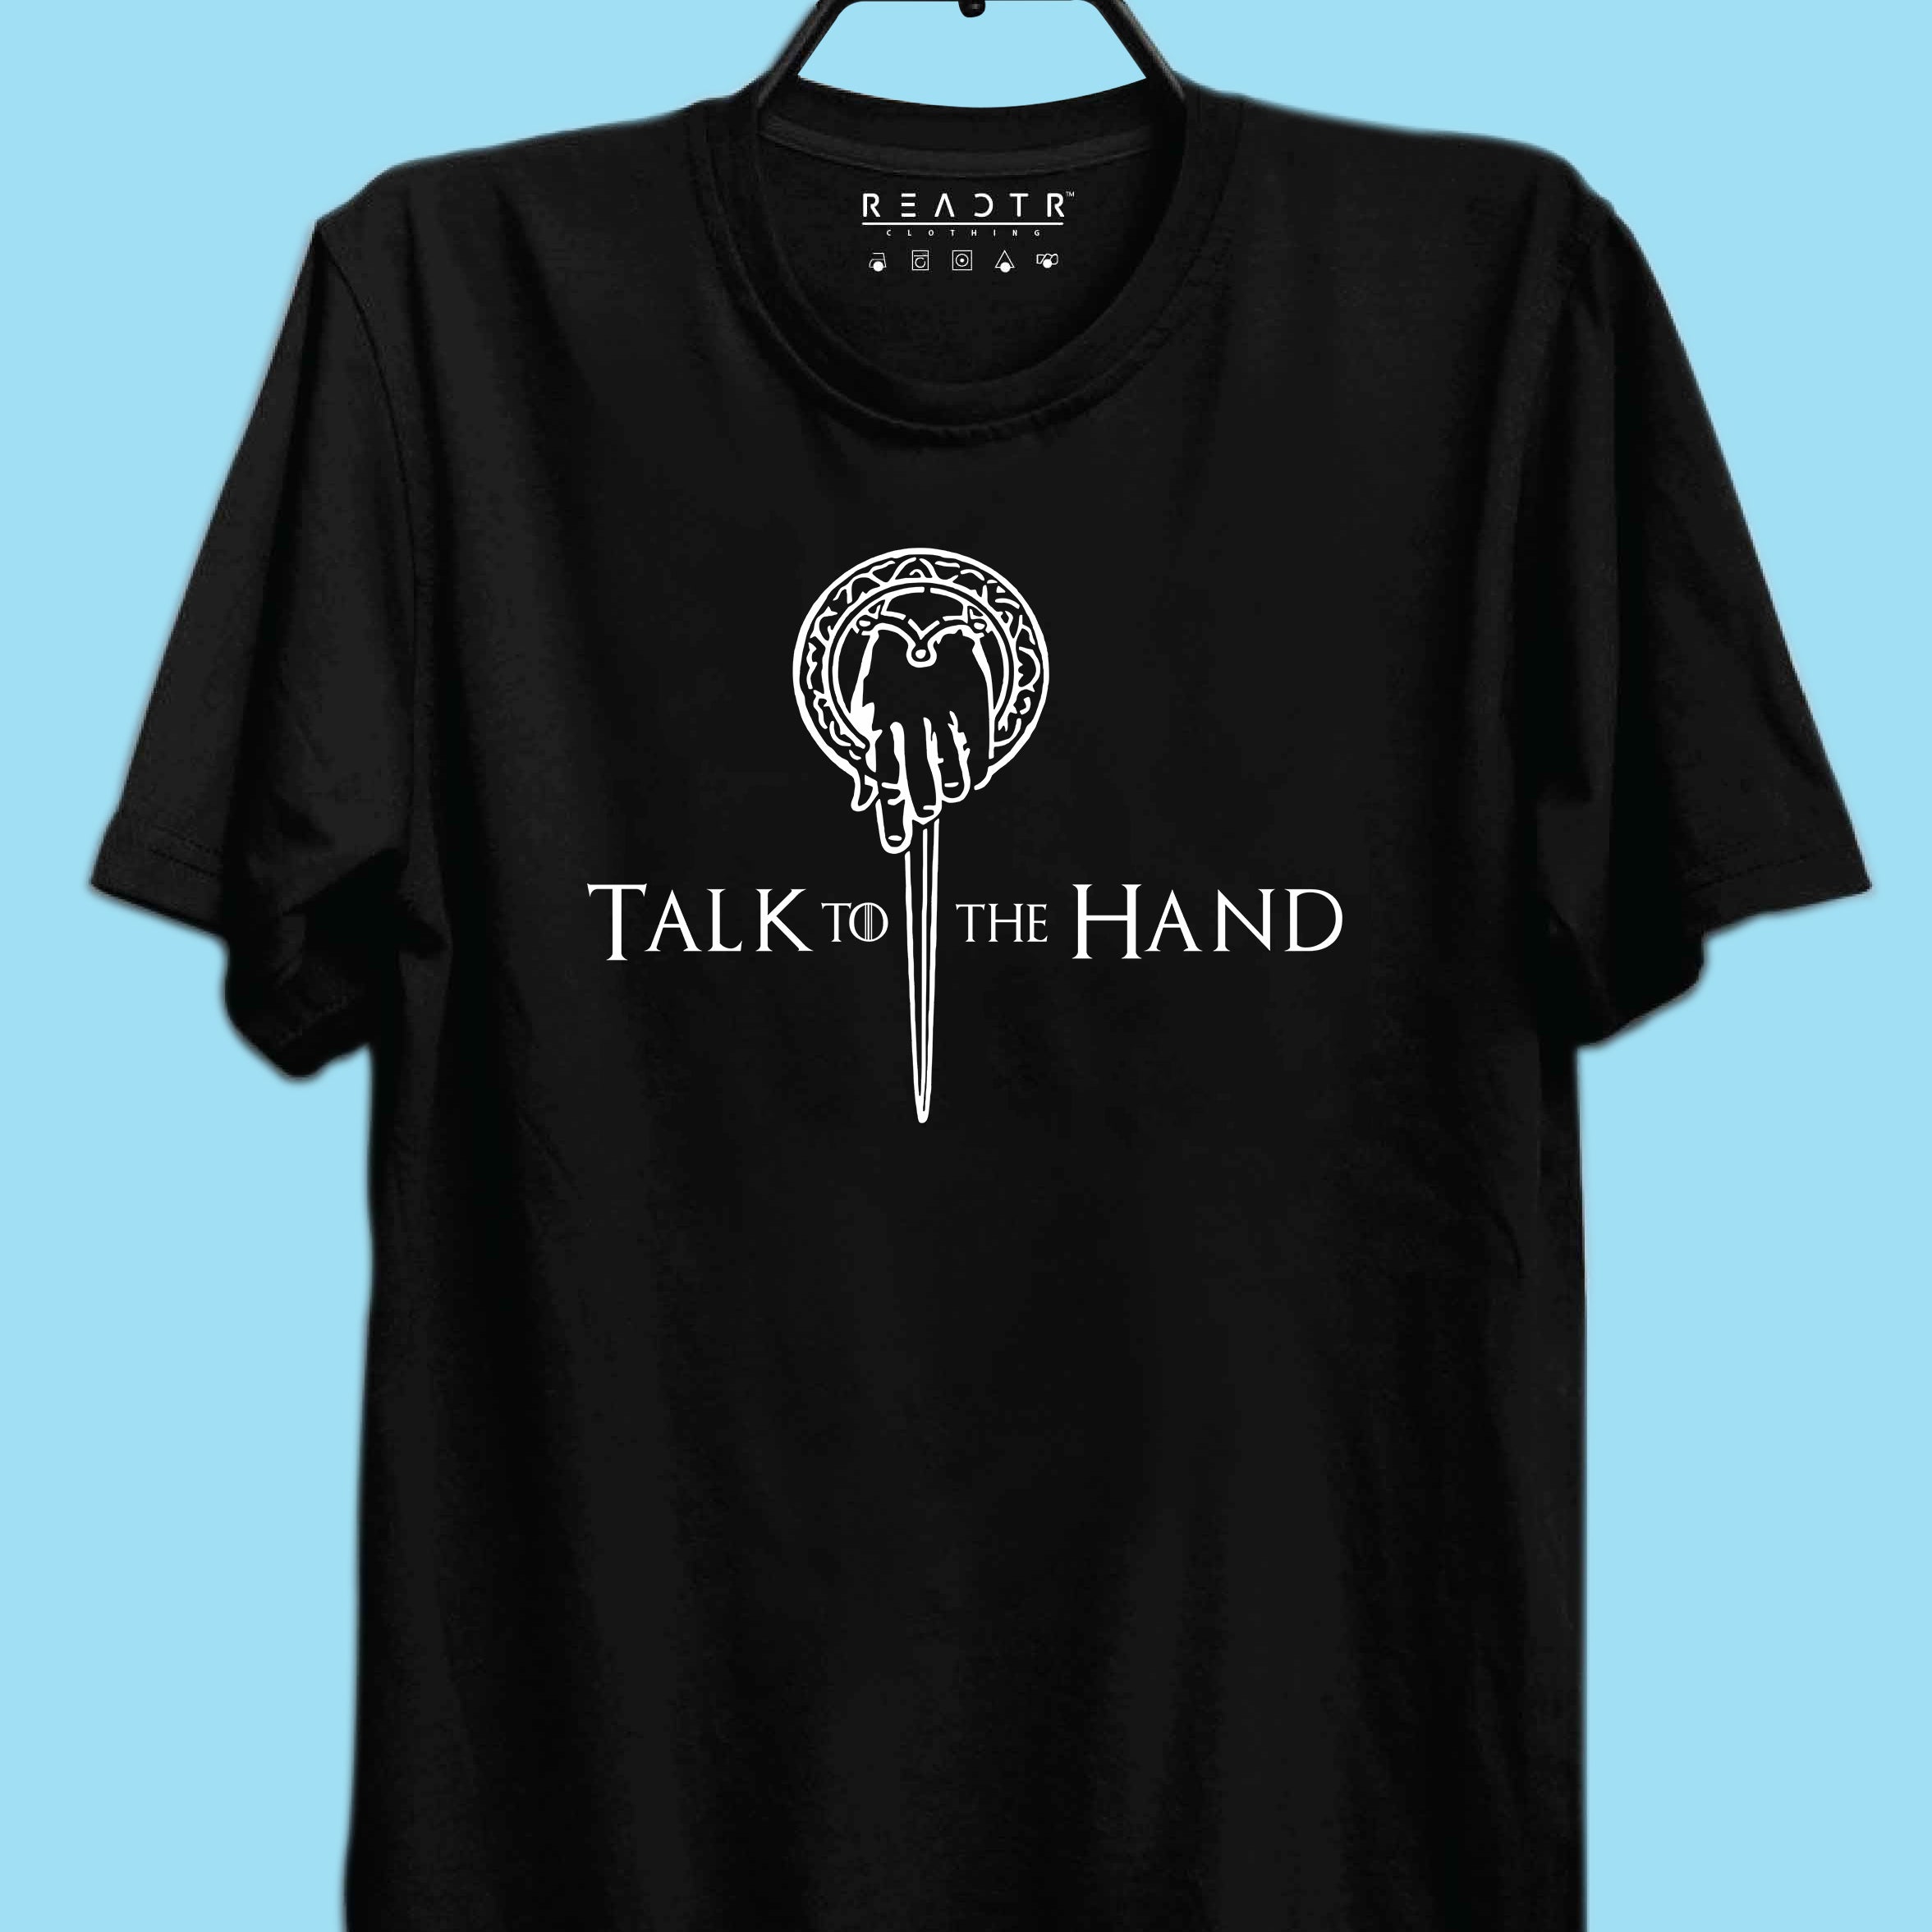 Talk To The Hand GOT Reactr Tshirts For Men - Eyewearlabs